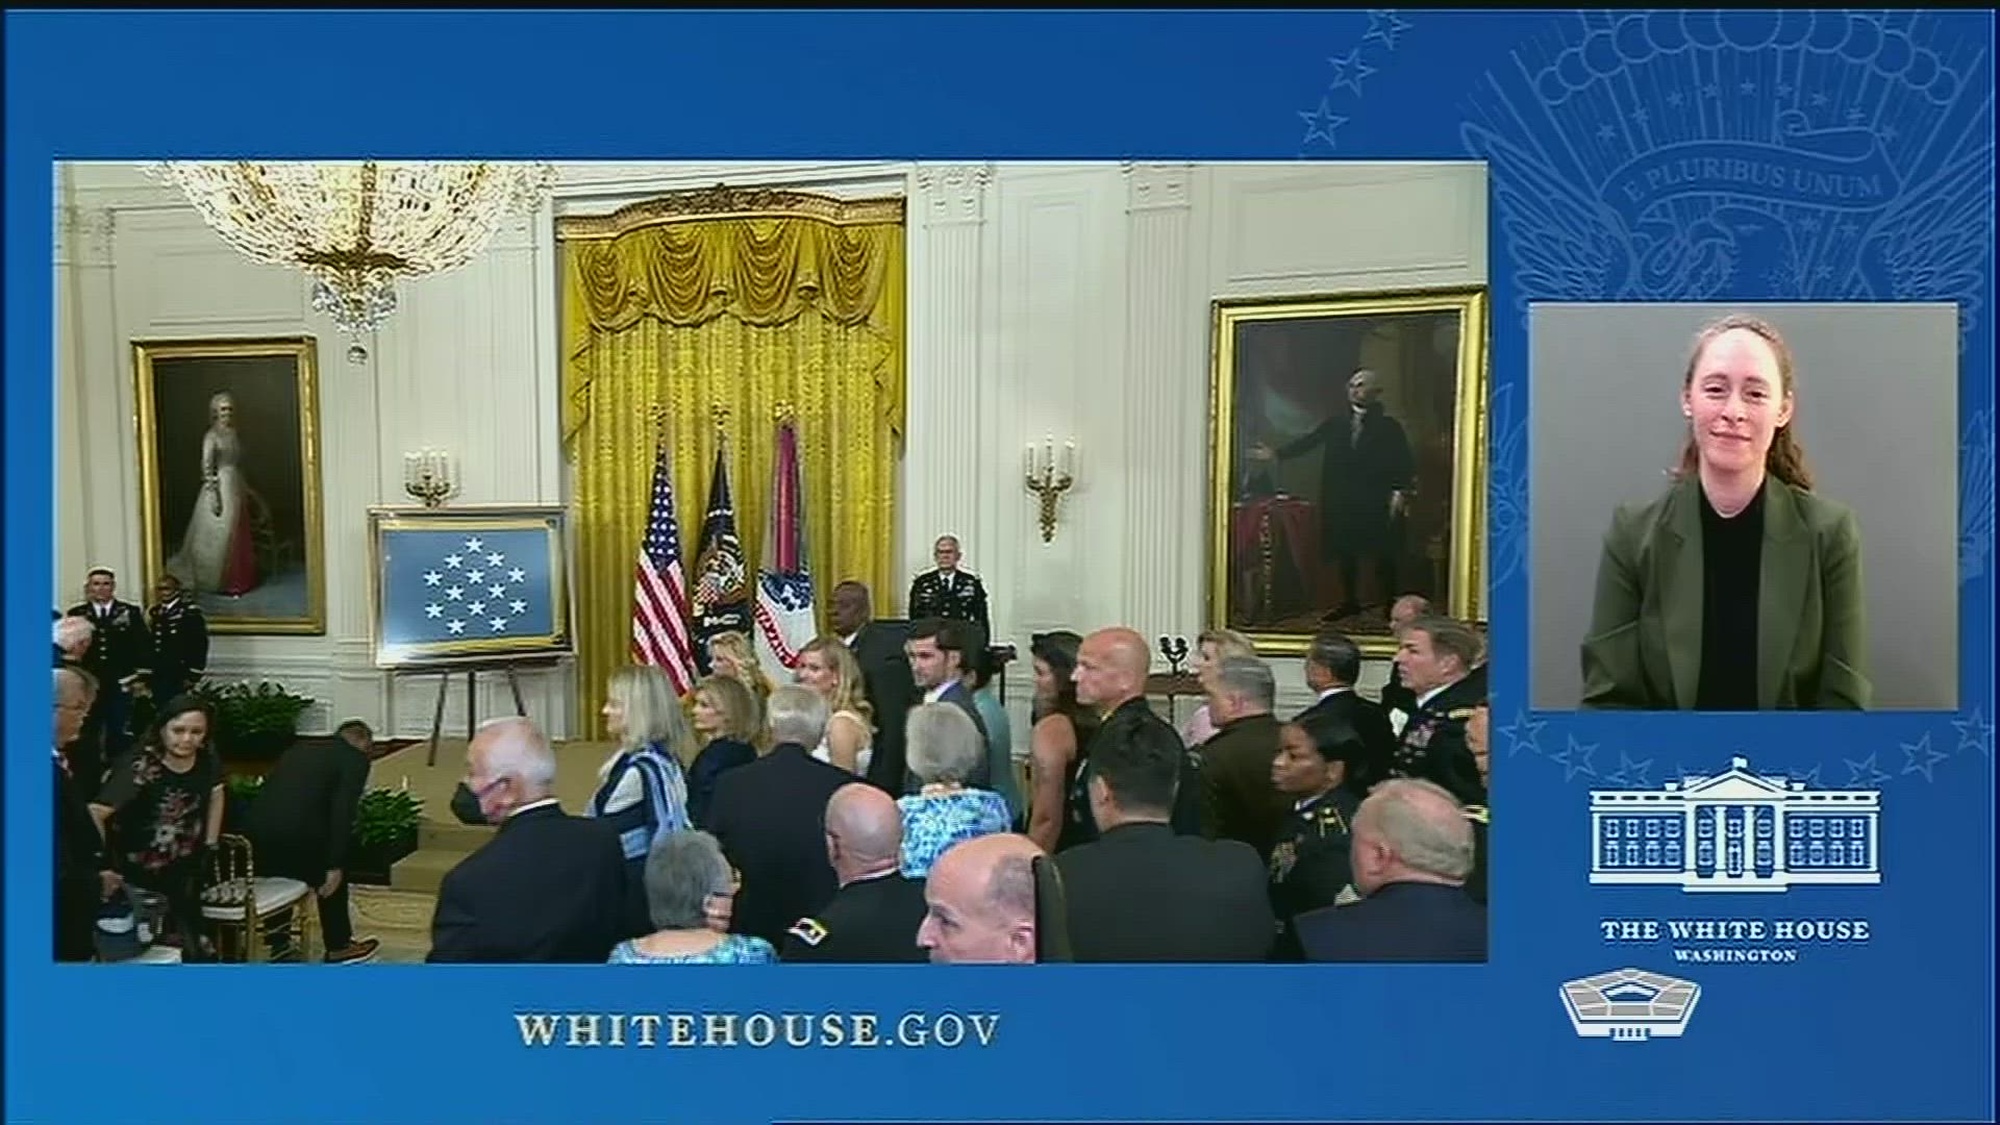 View of an audience in a White House room. 